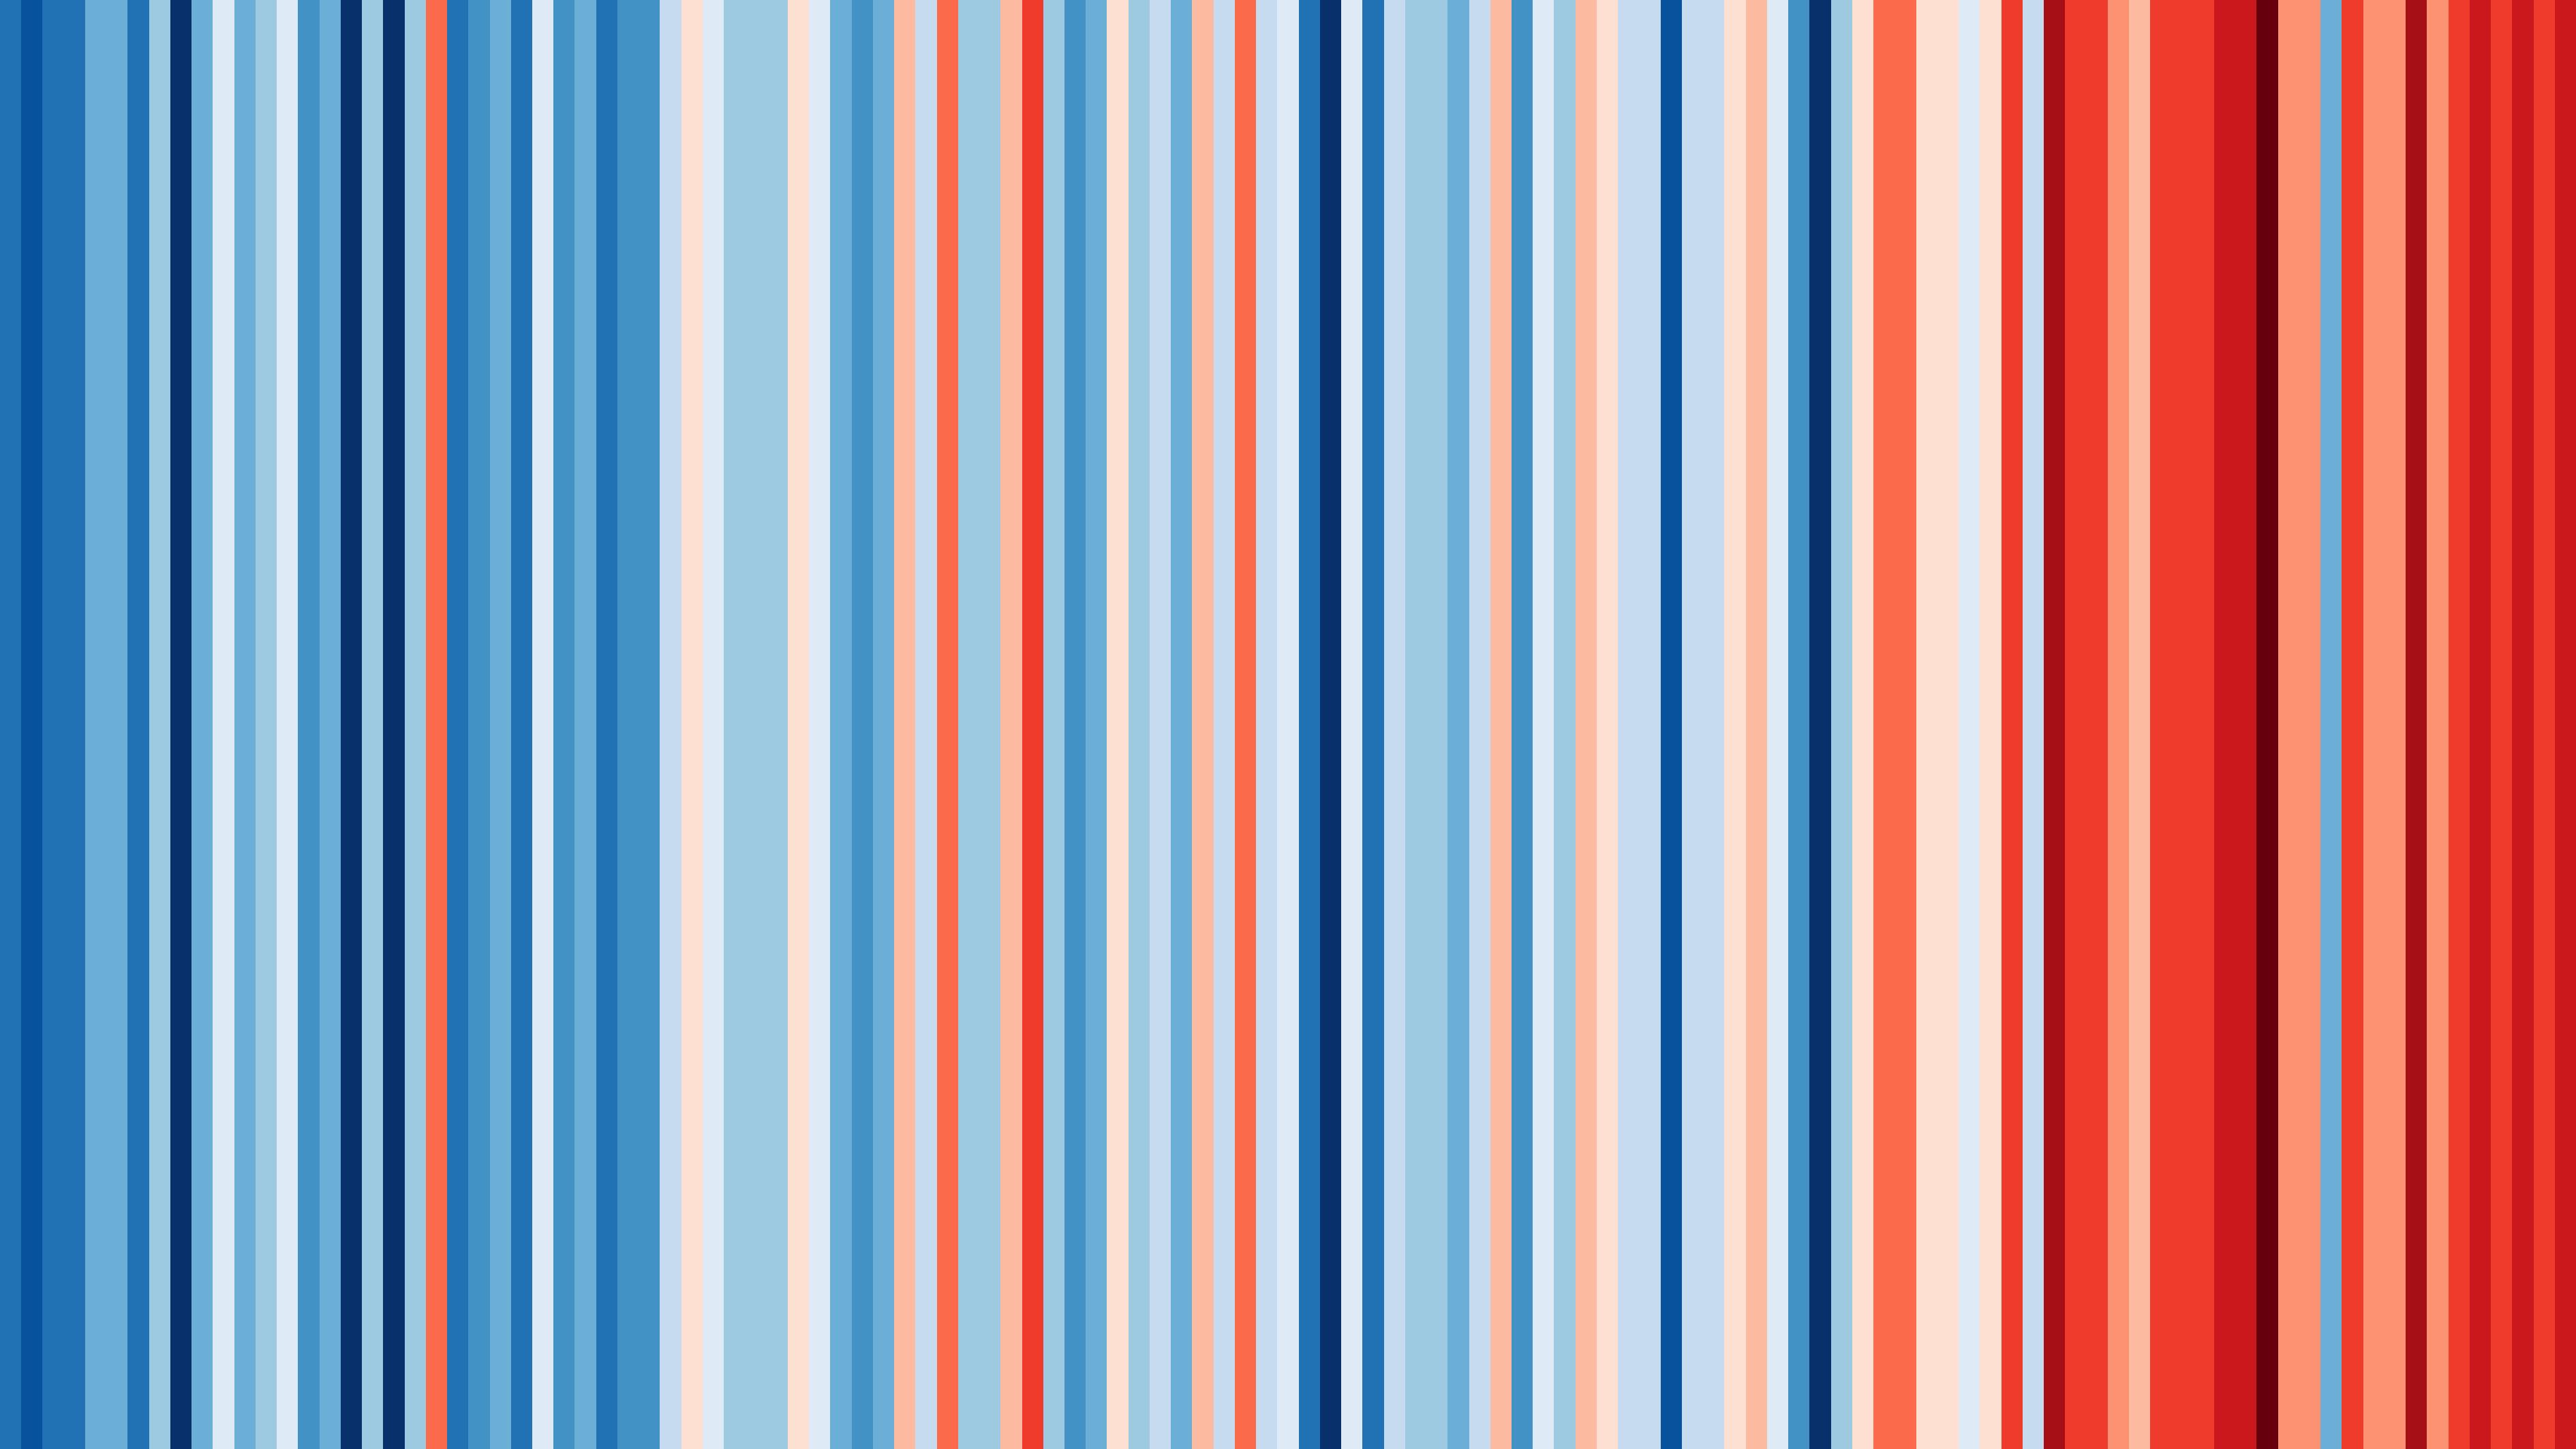 The ‘warming stripes’ show how much Ireland has warmed between 1901 and 2021